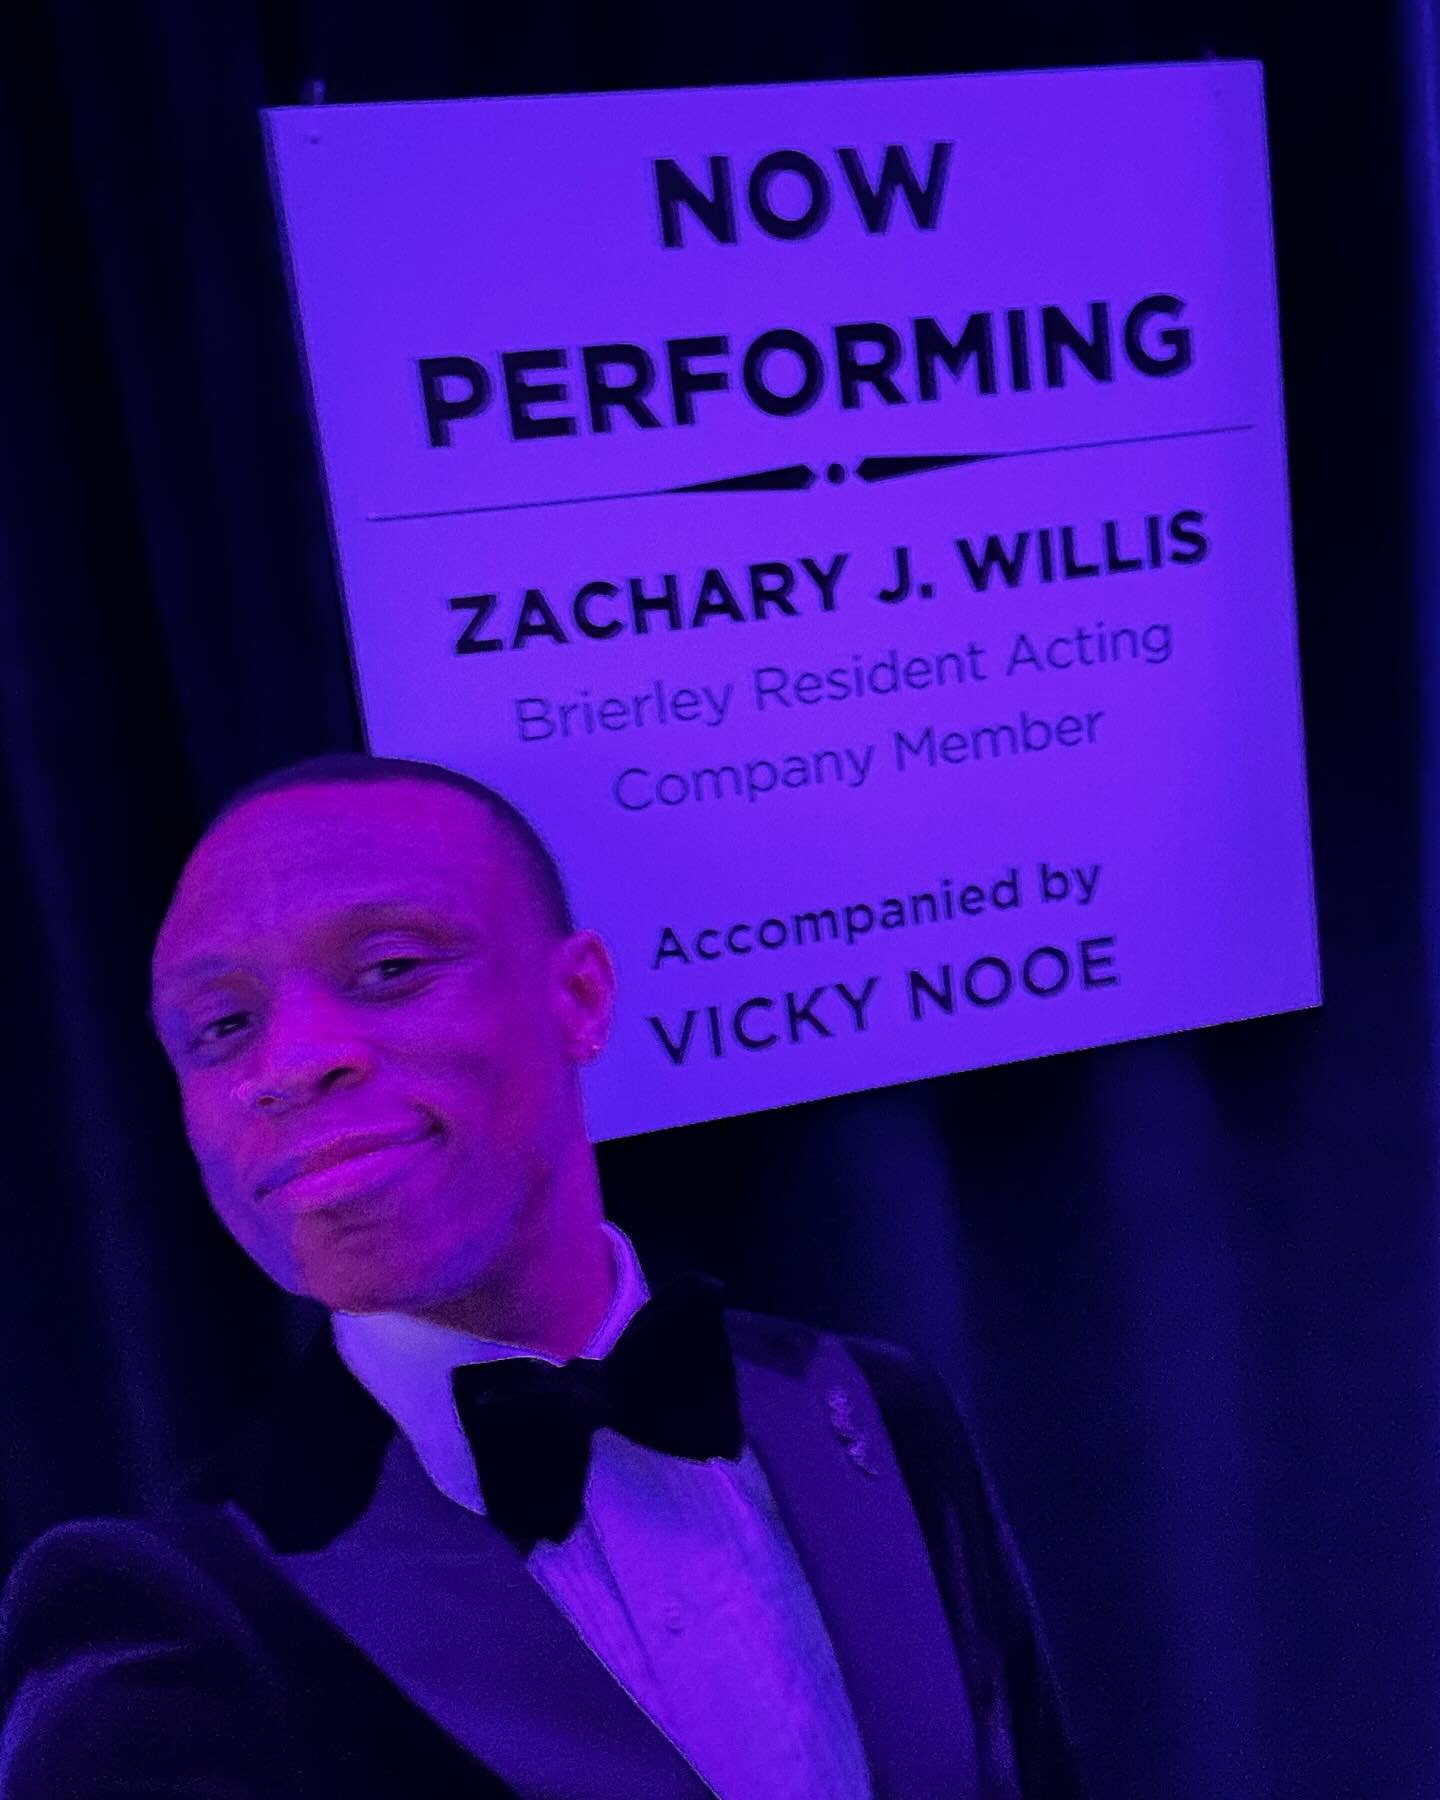 Another successful Gala in the books!🎭

I had a pleasure of representing the Brierley Resident Acting Company and singing songs from our upcoming productions of Disney&rsquo;s The Little Mermaid and Joseph and the Amazing Technicolor Dreamcoat at Da